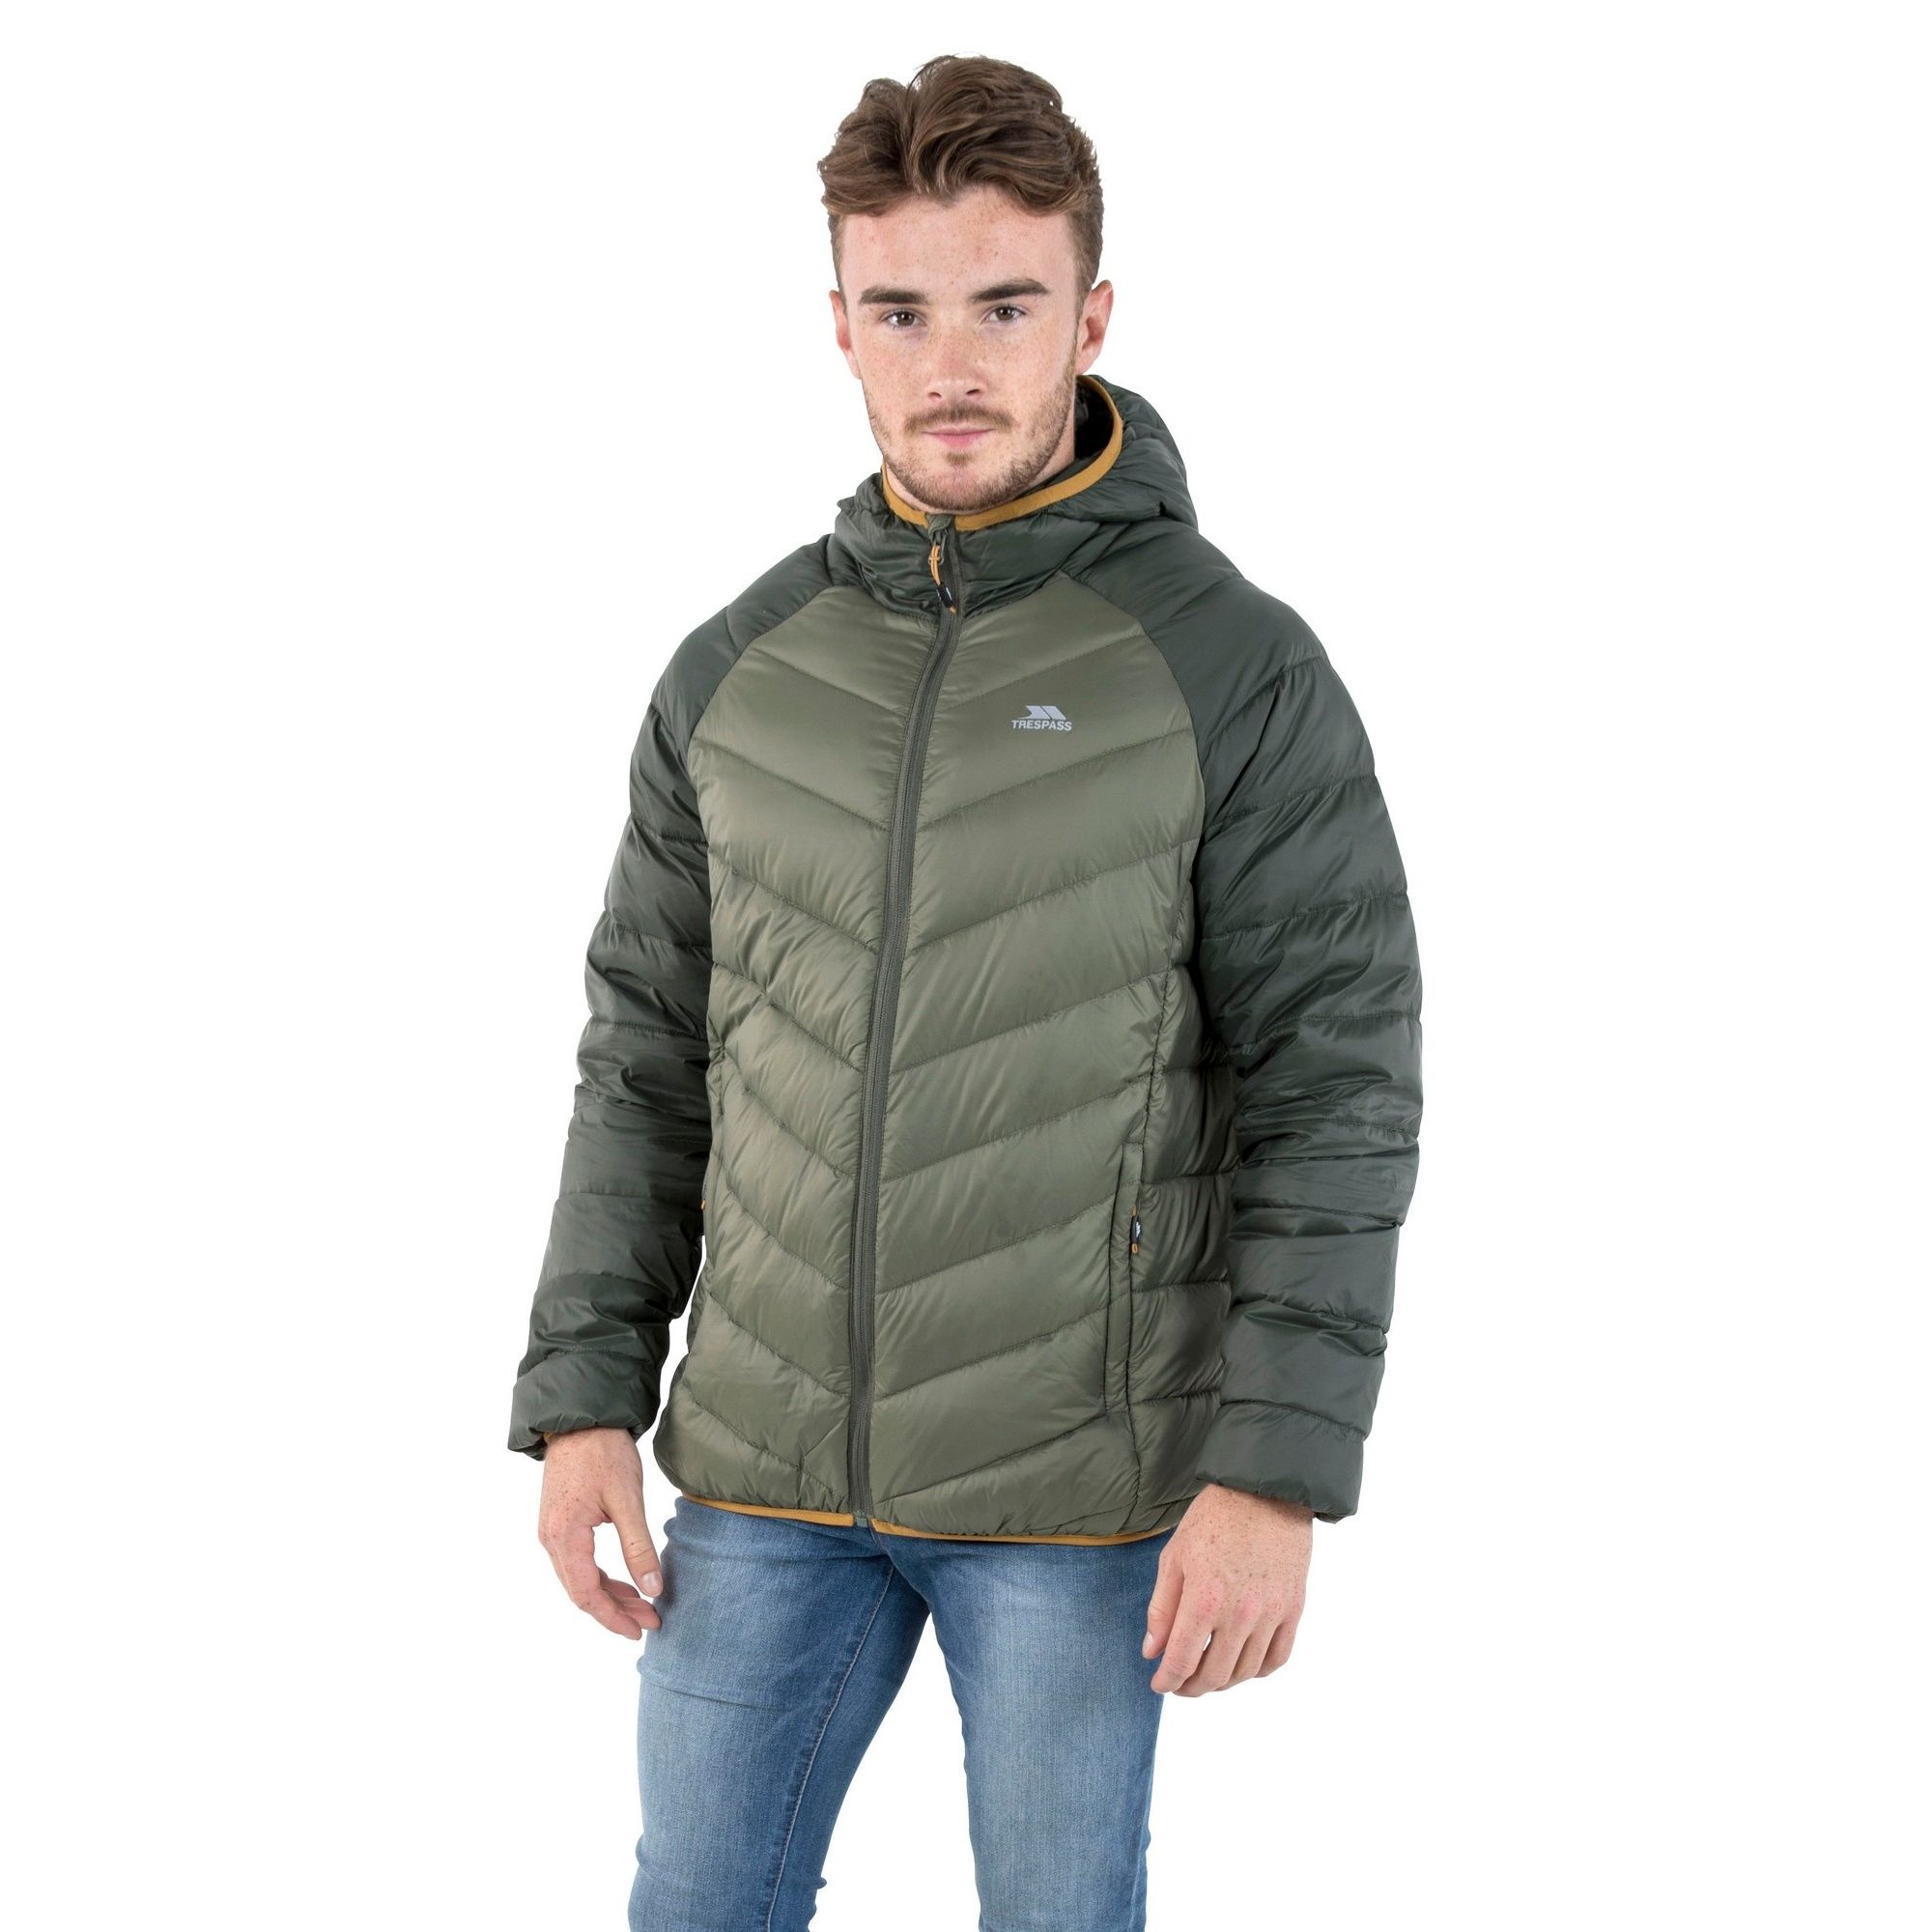 Helping you to keep warm and on-trend, the Rusler mens down jacket will allow you to go about your day comfortably even when it`s cold out. Grown on hood, down padded jacket. Contrast binding on hood, cuffs and hem. Contrast sleeve and hood detail. Material: Shell: 100% Polyamide. Lining: 100% Polyamide. Filling: 90% Down 10% Feather. Trespass Mens Chest Sizing (approx): S - 35-37in/89-94cm, M - 38-40in/96.5-101.5cm, L - 41-43in/104-109cm, XL - 44-46in/111.5-117cm, XXL - 46-48in/117-122cm, 3XL - 48-50in/122-127cm.